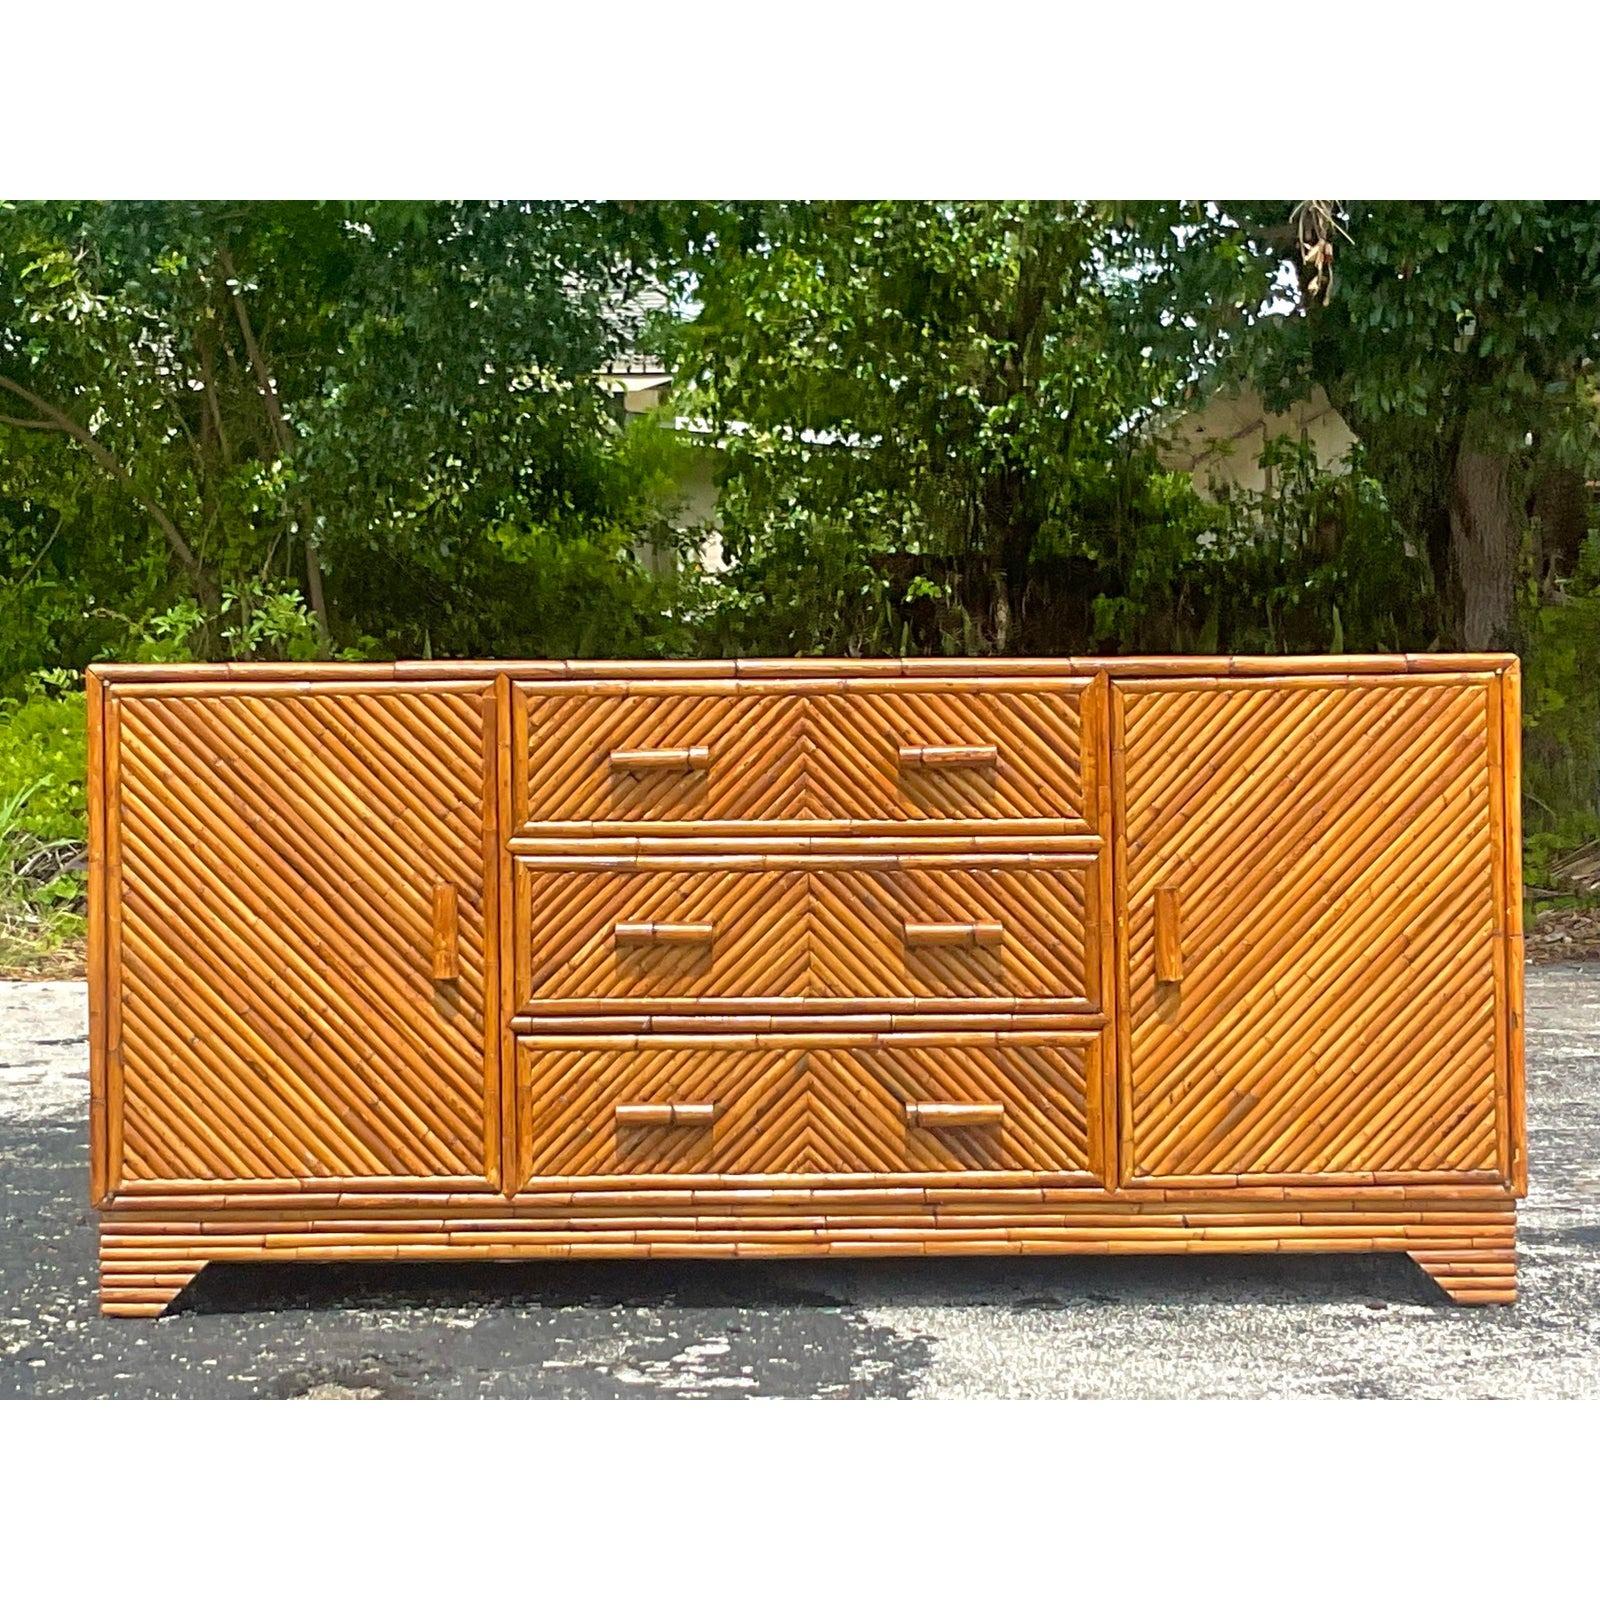 A truly spectacular vintage Coastal credenza. Chic thick rattan in a Chevron design. Lots of great storage below with cabinets and drawers. Acquired from a Palm Beach estate.